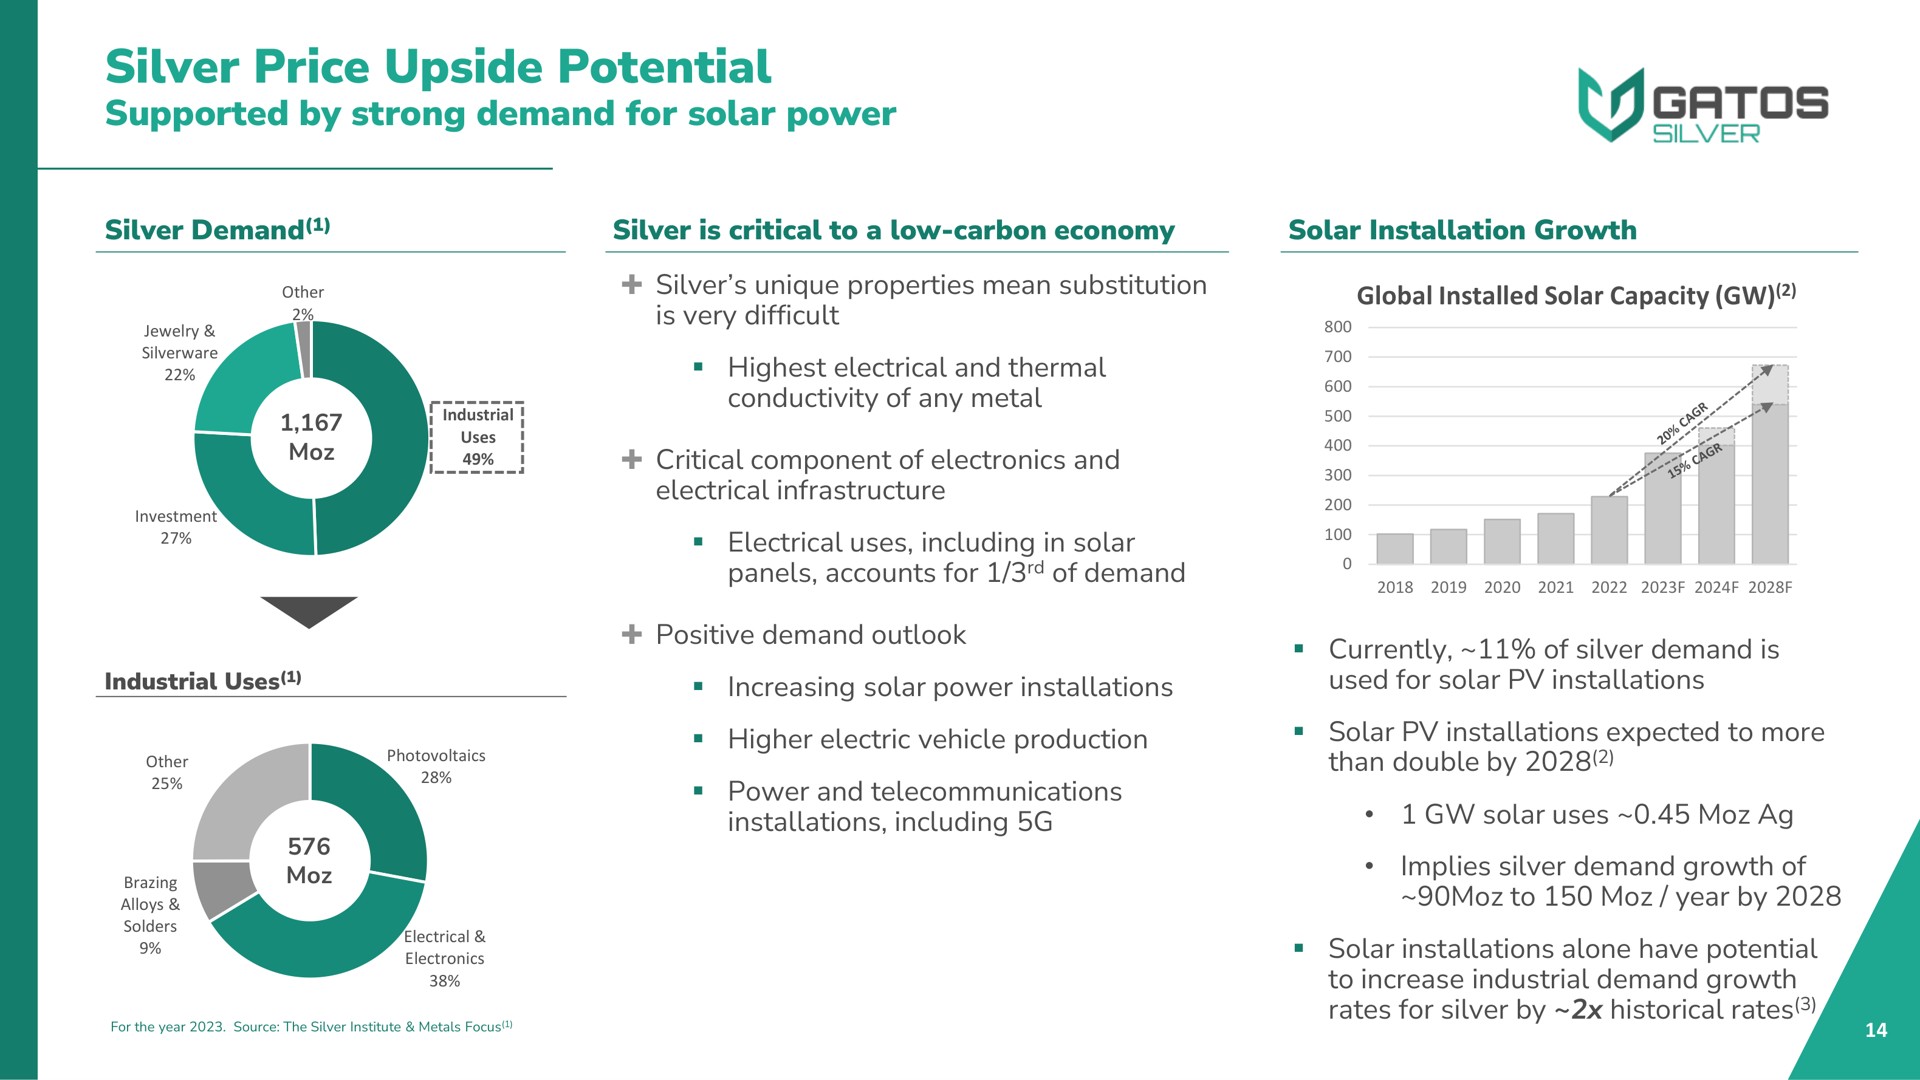 silver price upside potential supported by strong demand for solar power alloys to year | Gatos Silver